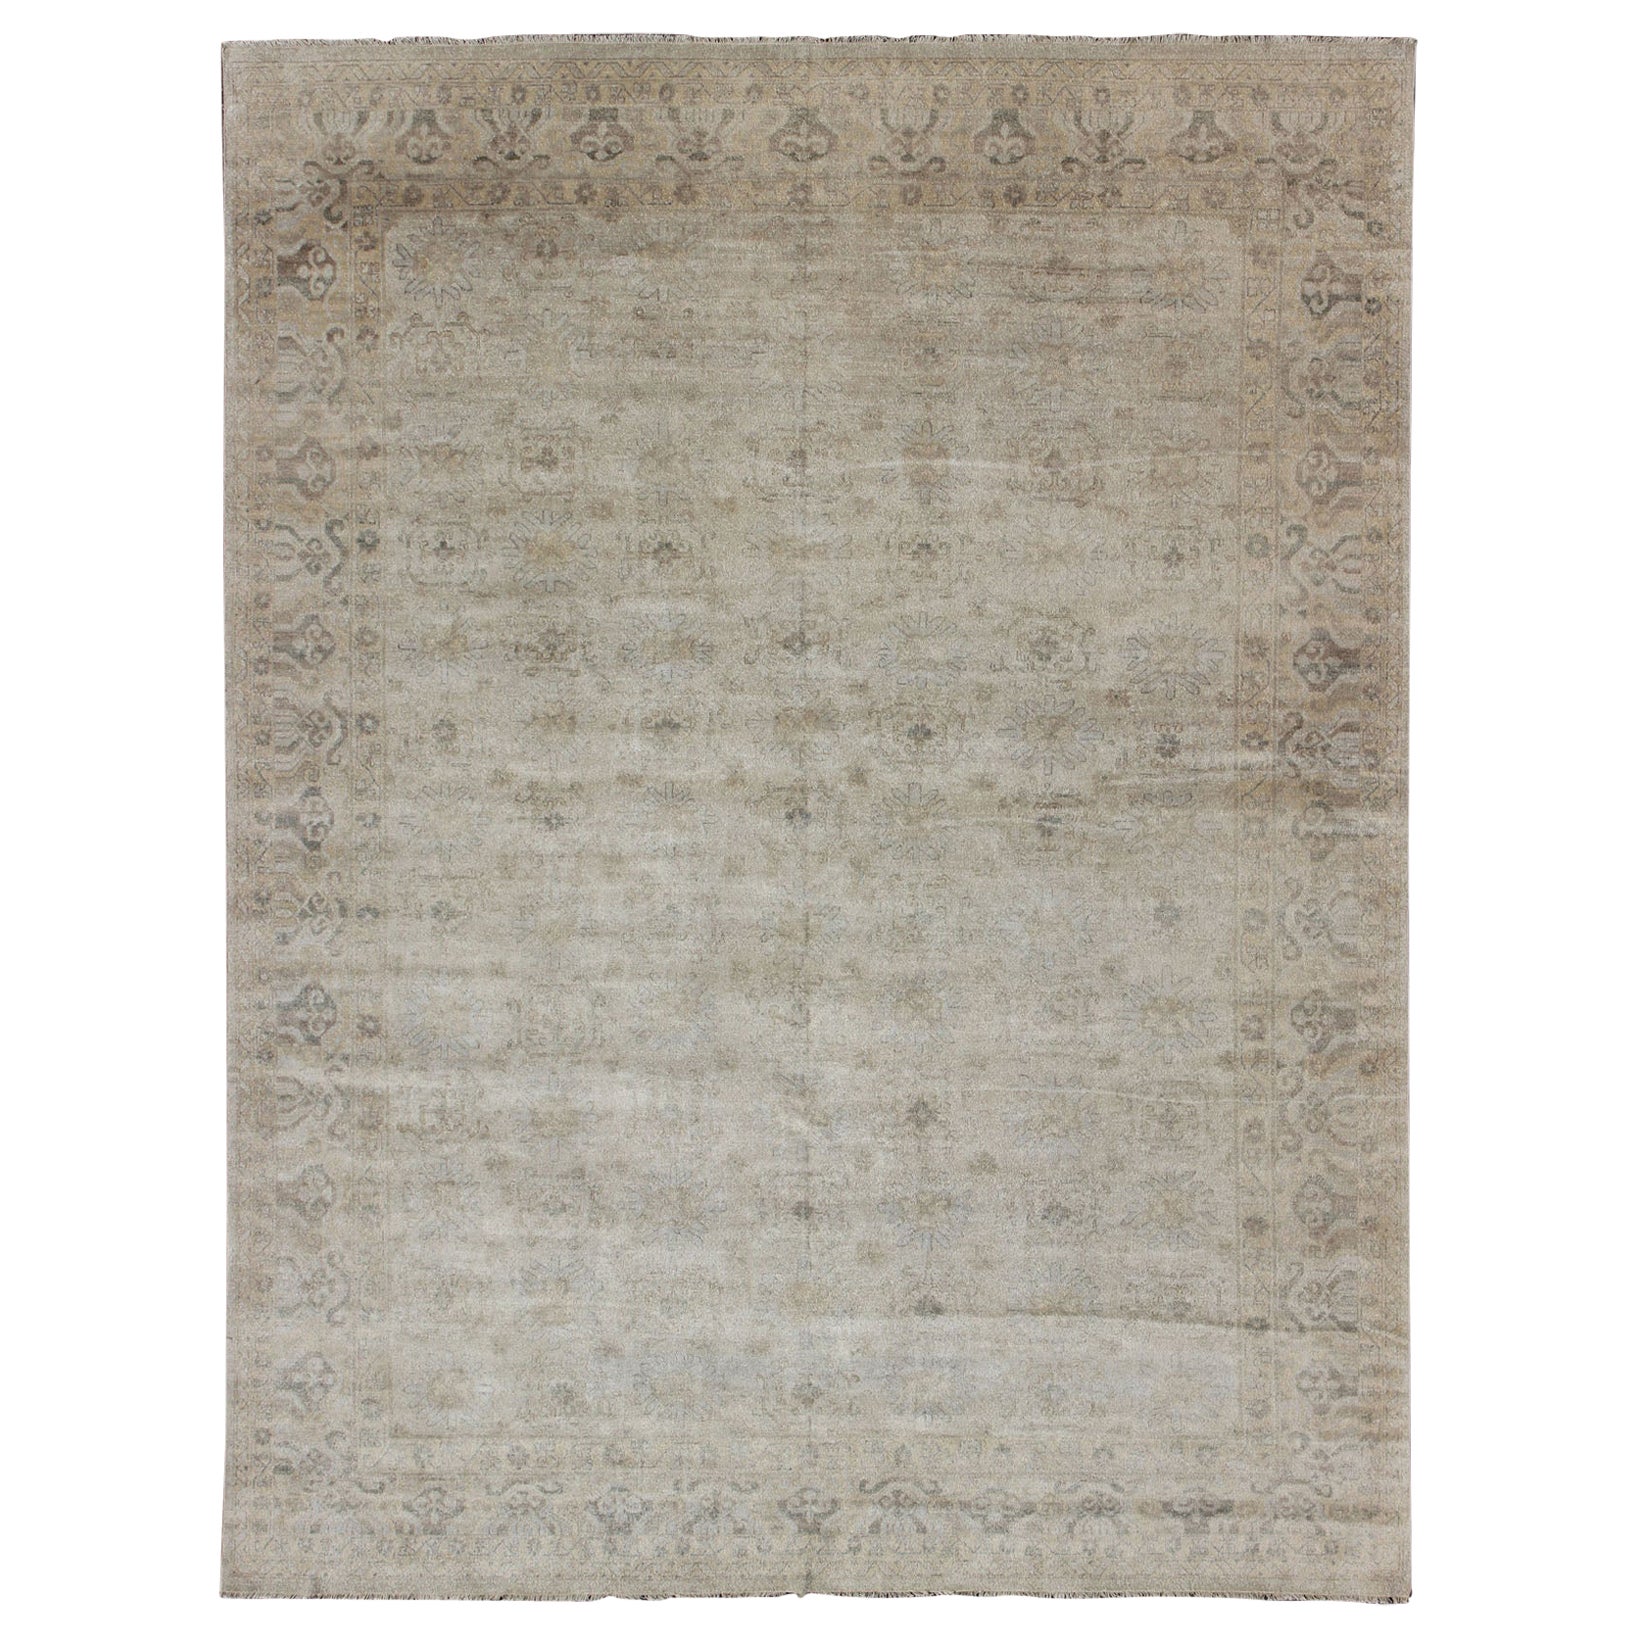 Large Muted Modern Khotan Rug with All-Over Sub-Geometric Motifs For Sale